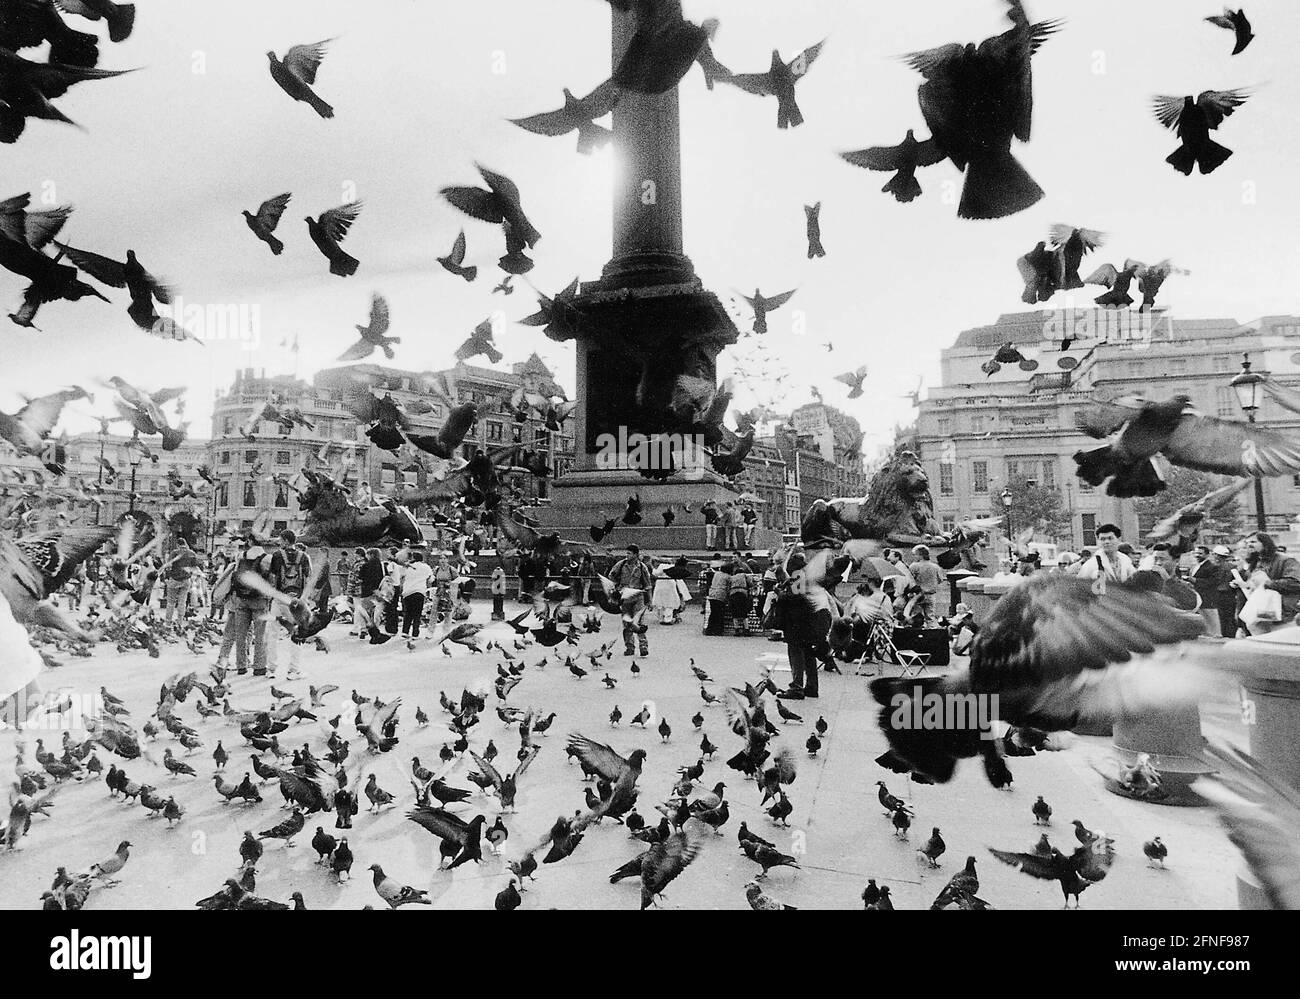 In London's Trafalgar Square, the pigeons are outnumbered. [automated translation] Stock Photo